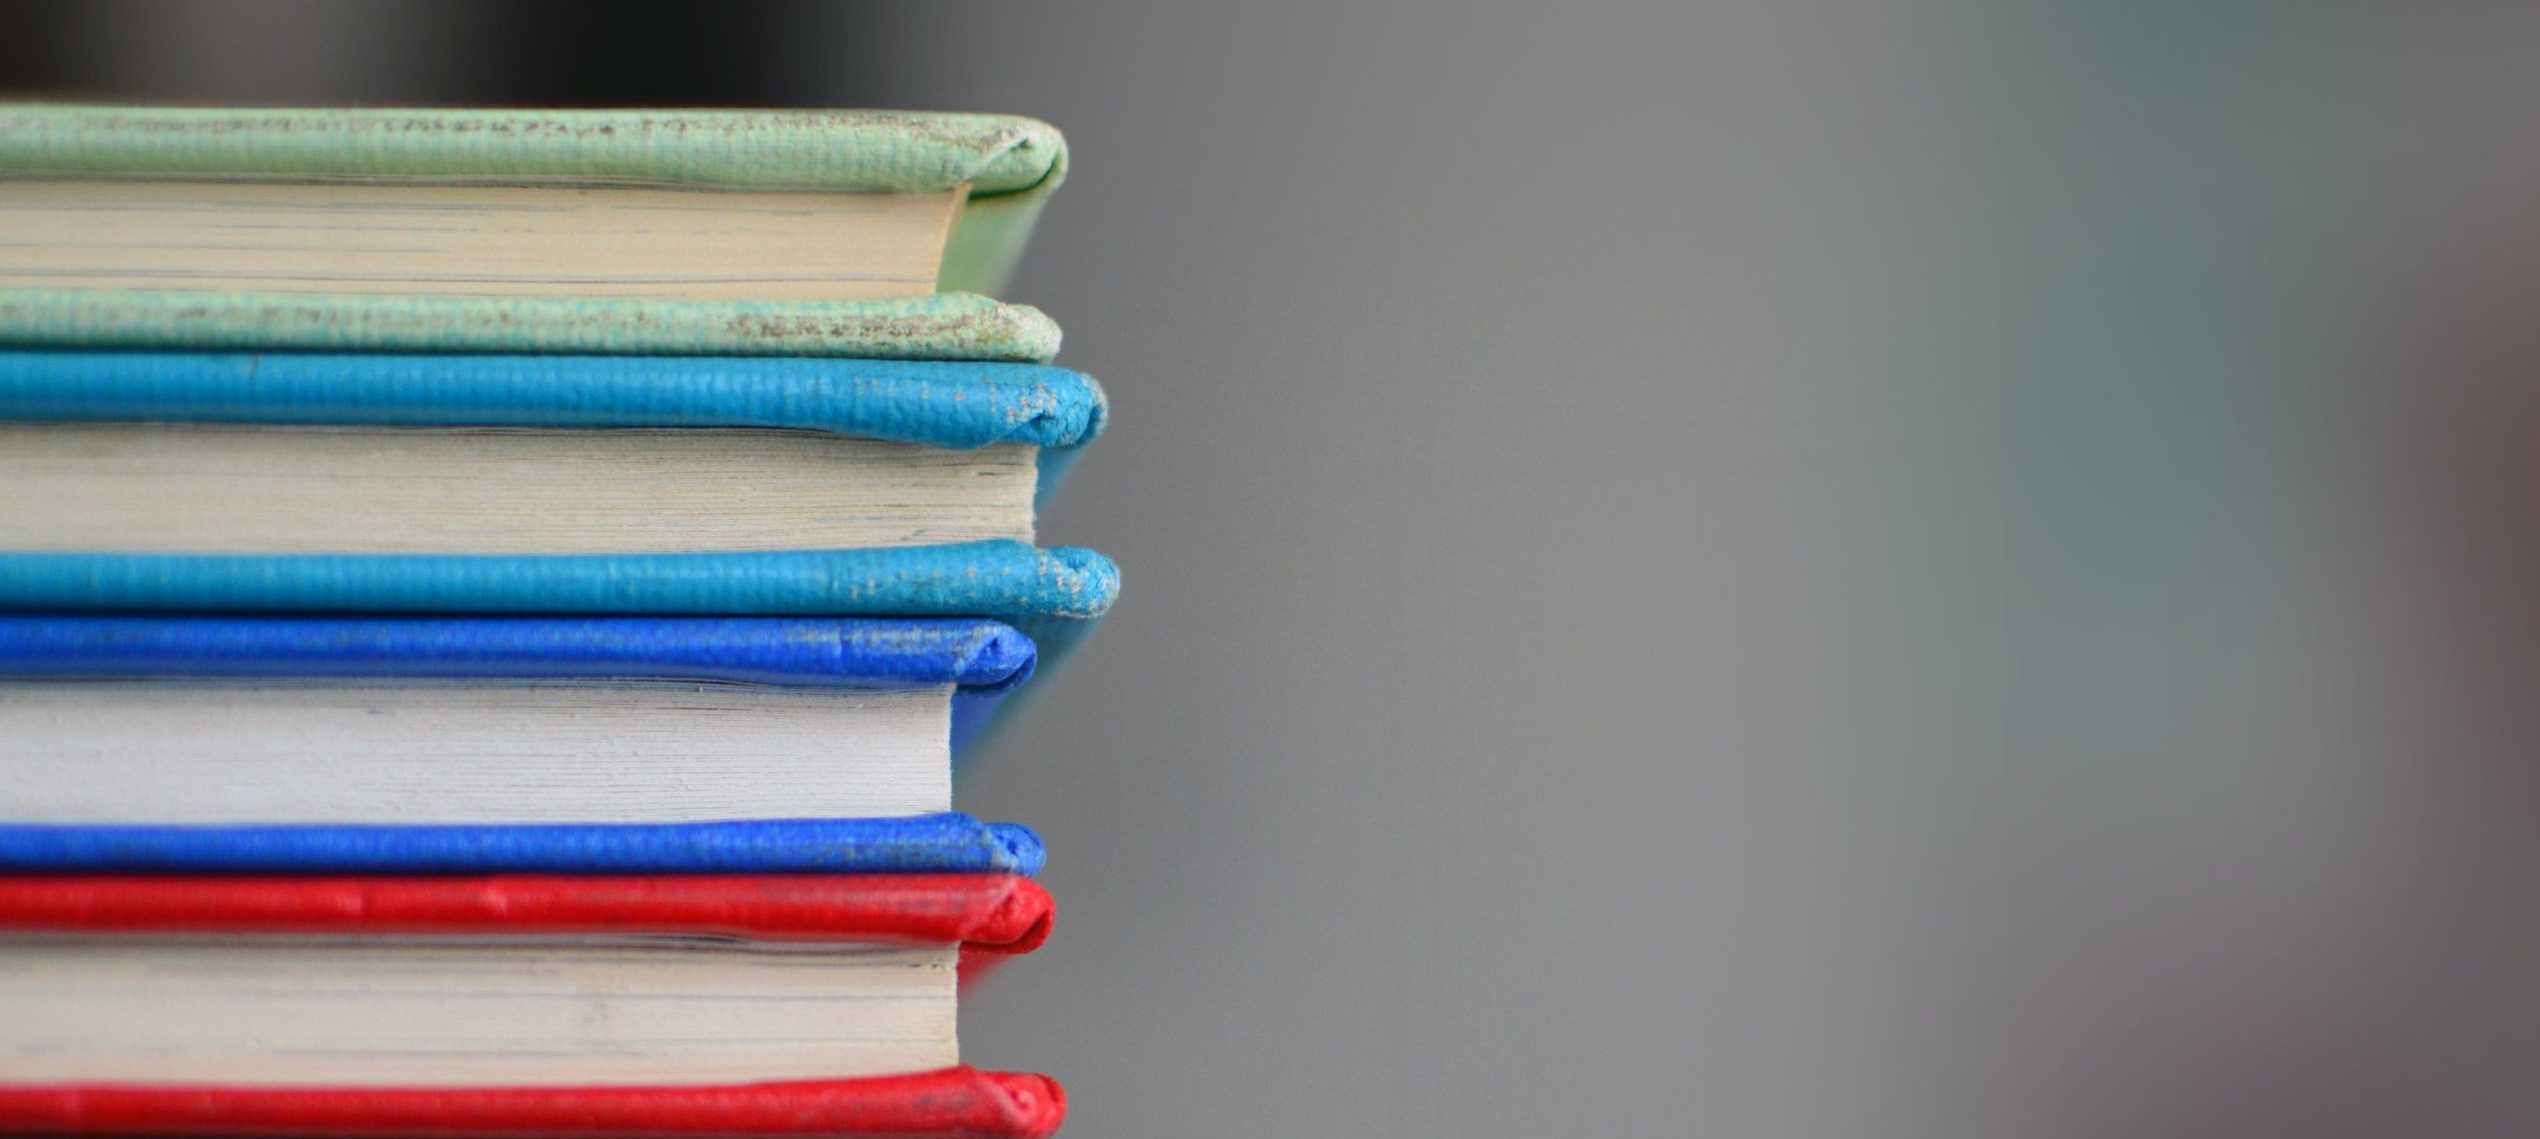 Stack of books (stock image).